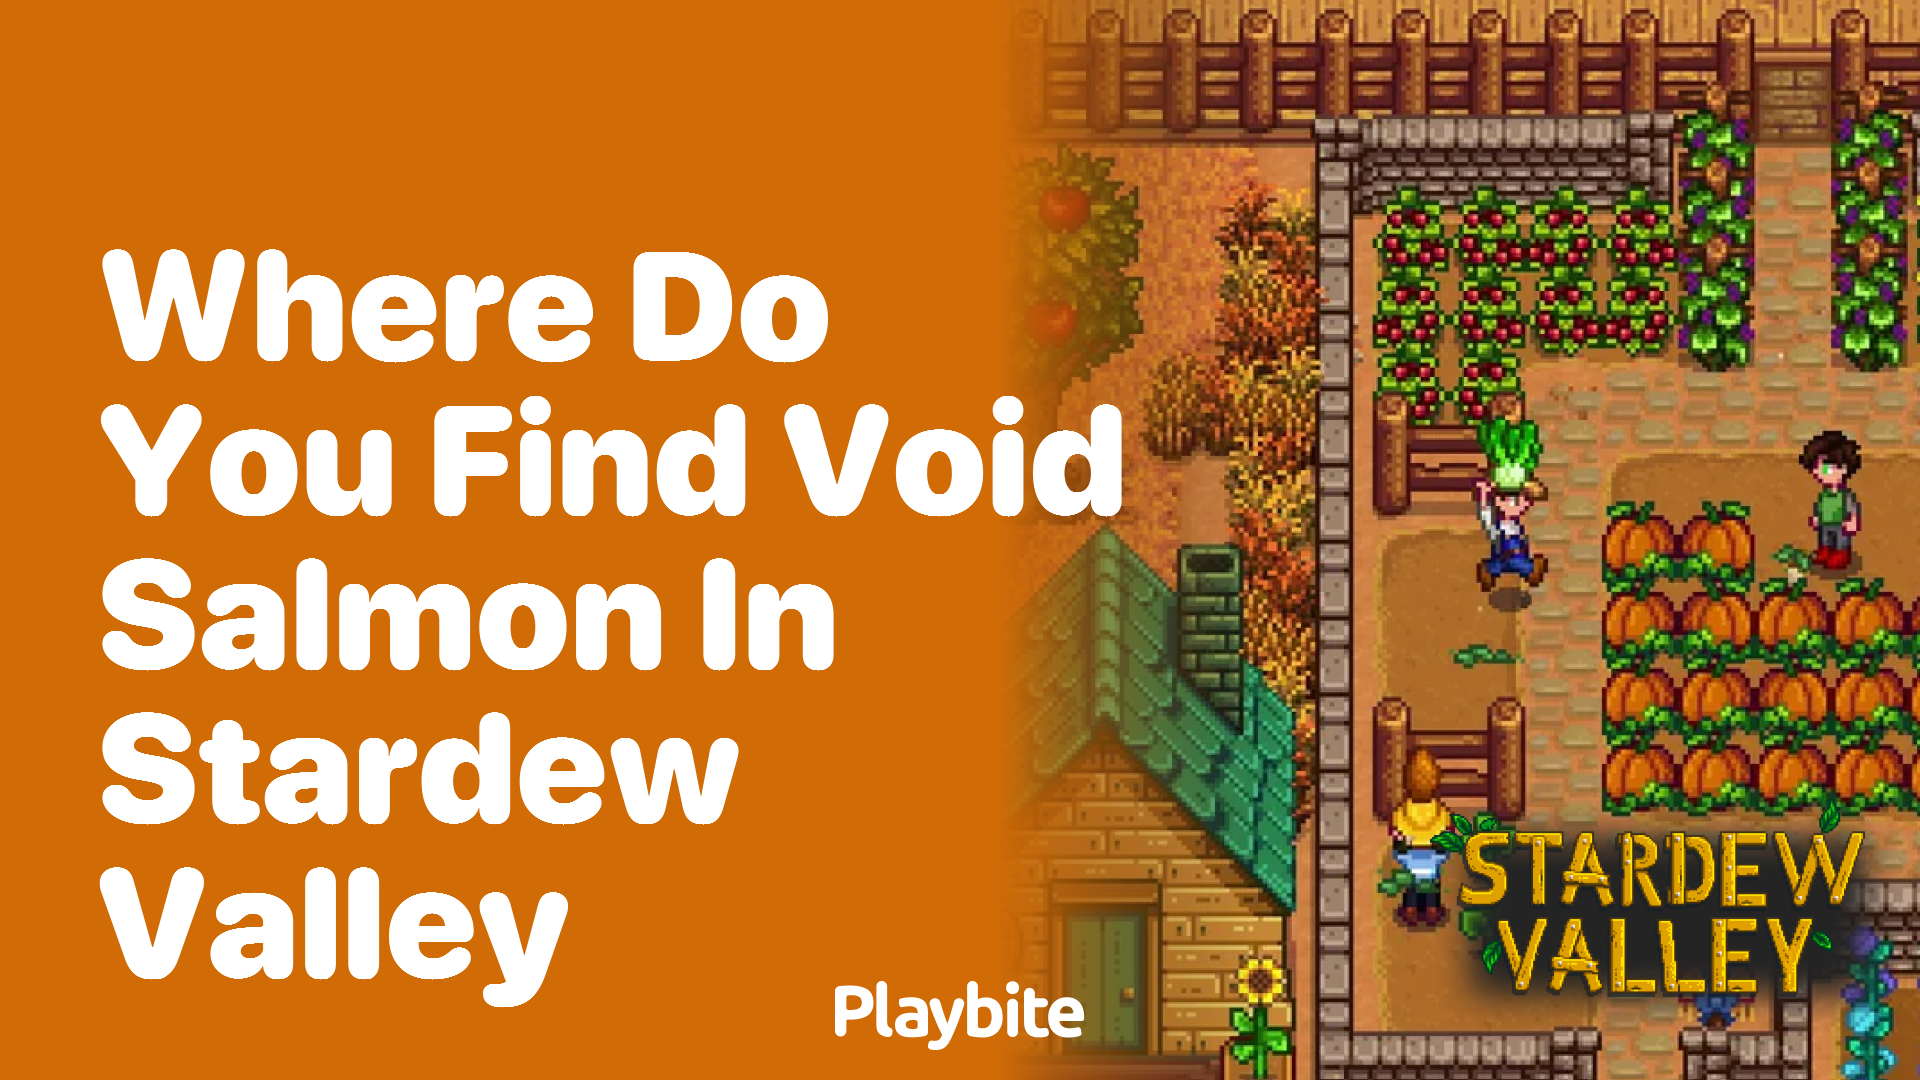 Where do you find Void Salmon in Stardew Valley?